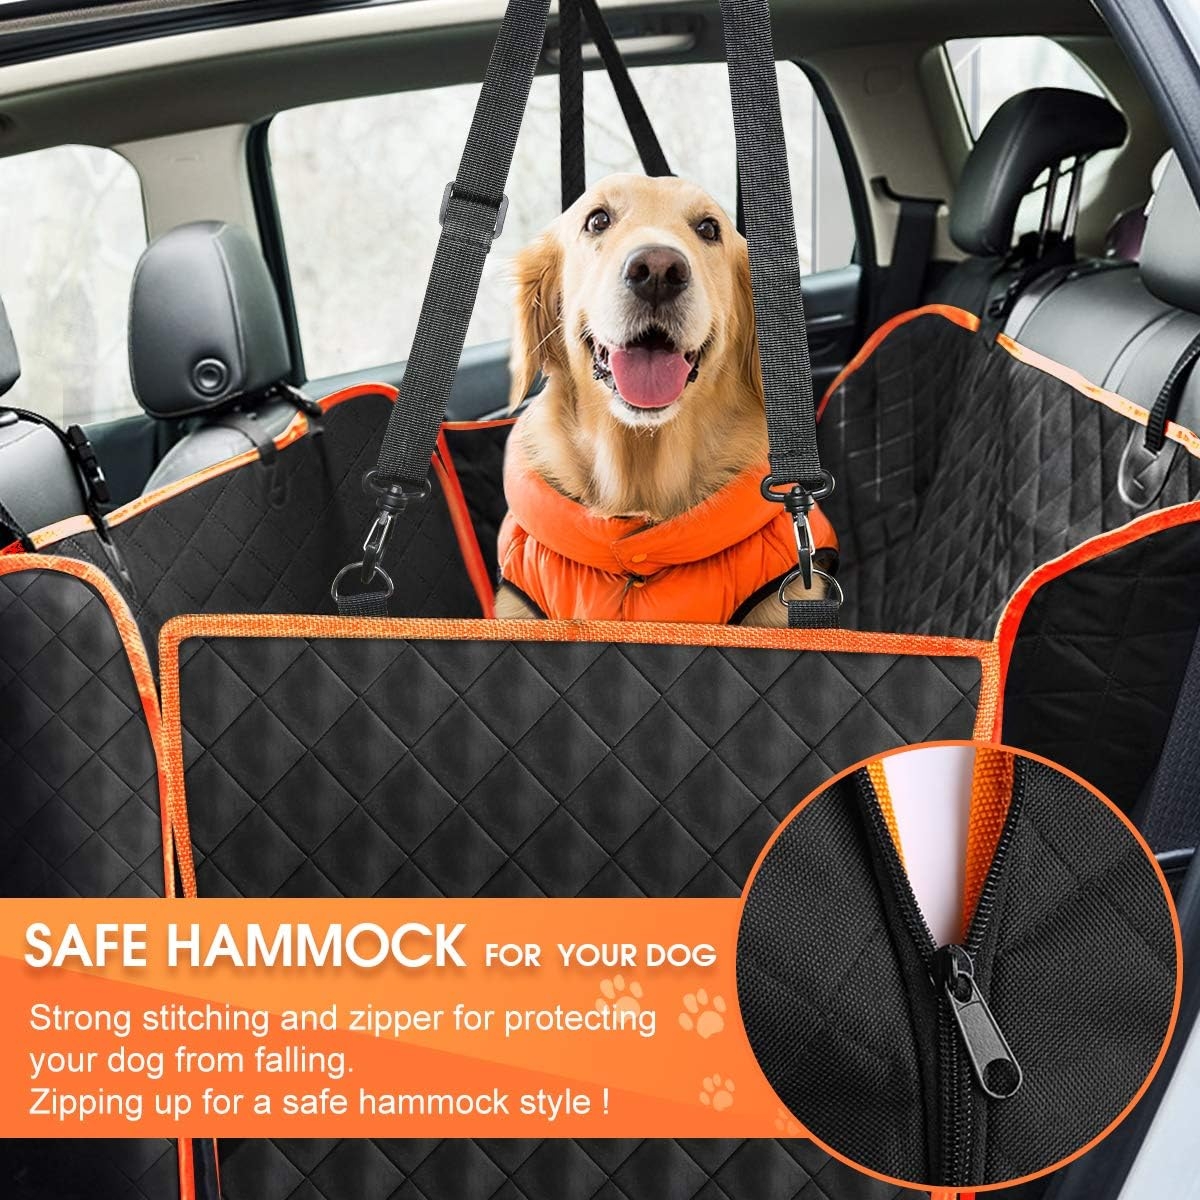 Dog Seat Cover for Back Seat, Waterproof Dog Hammock Scratchproof Pet Seat Covers with 4 Bags Side Flaps & 2 Dog Seat Belts, Washable Nonslip Seat Protector for Cars Trucks and SUVs